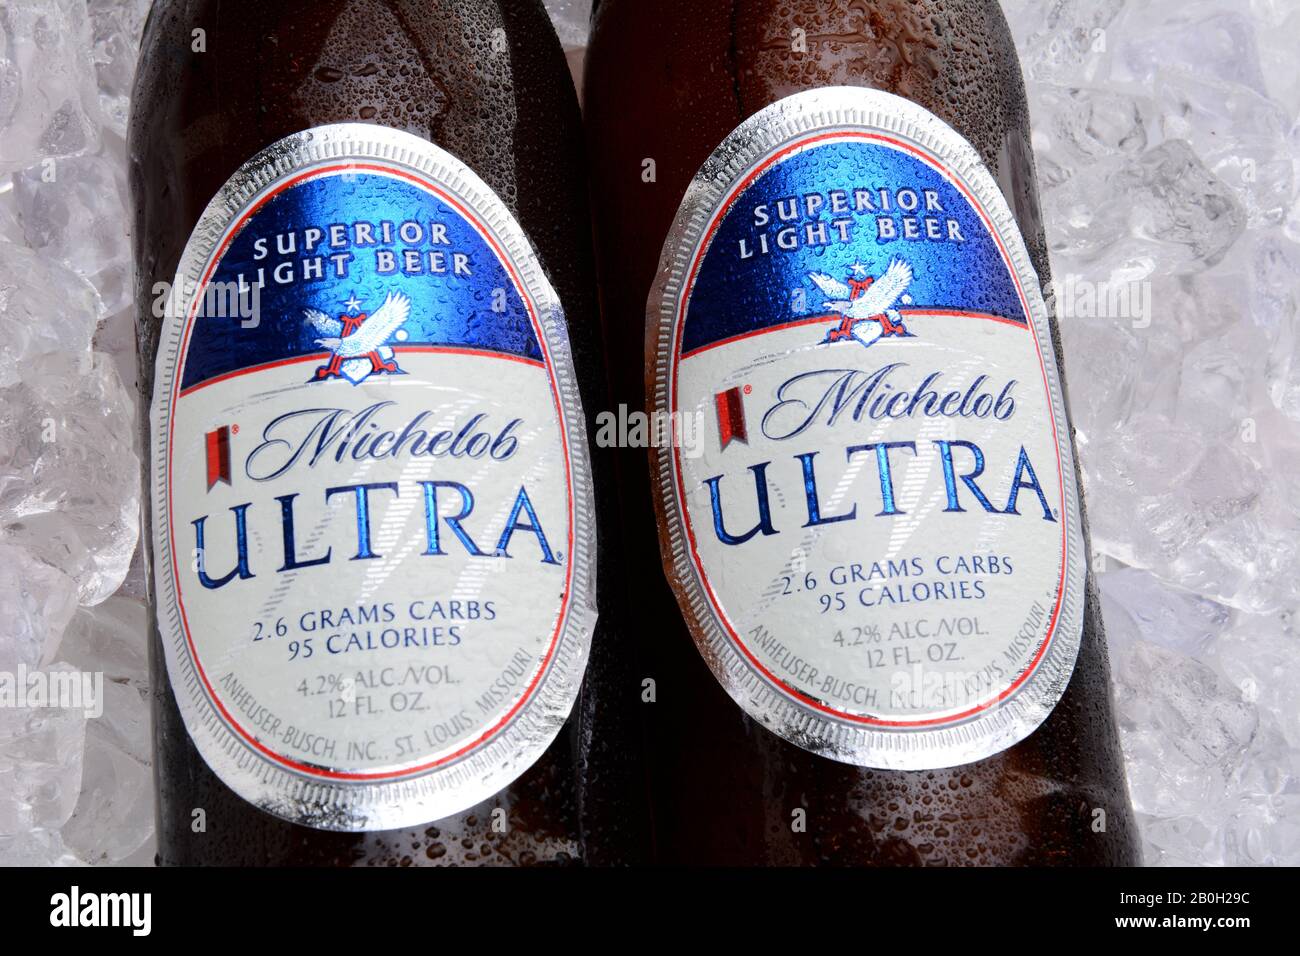 IRVINE, CA - MAY 25, 2014: Two bottles of Michelob Ultra on a bed of ice. Introduced in 2002 Michelob Ultra is a light beer with reduced calories and Stock Photo